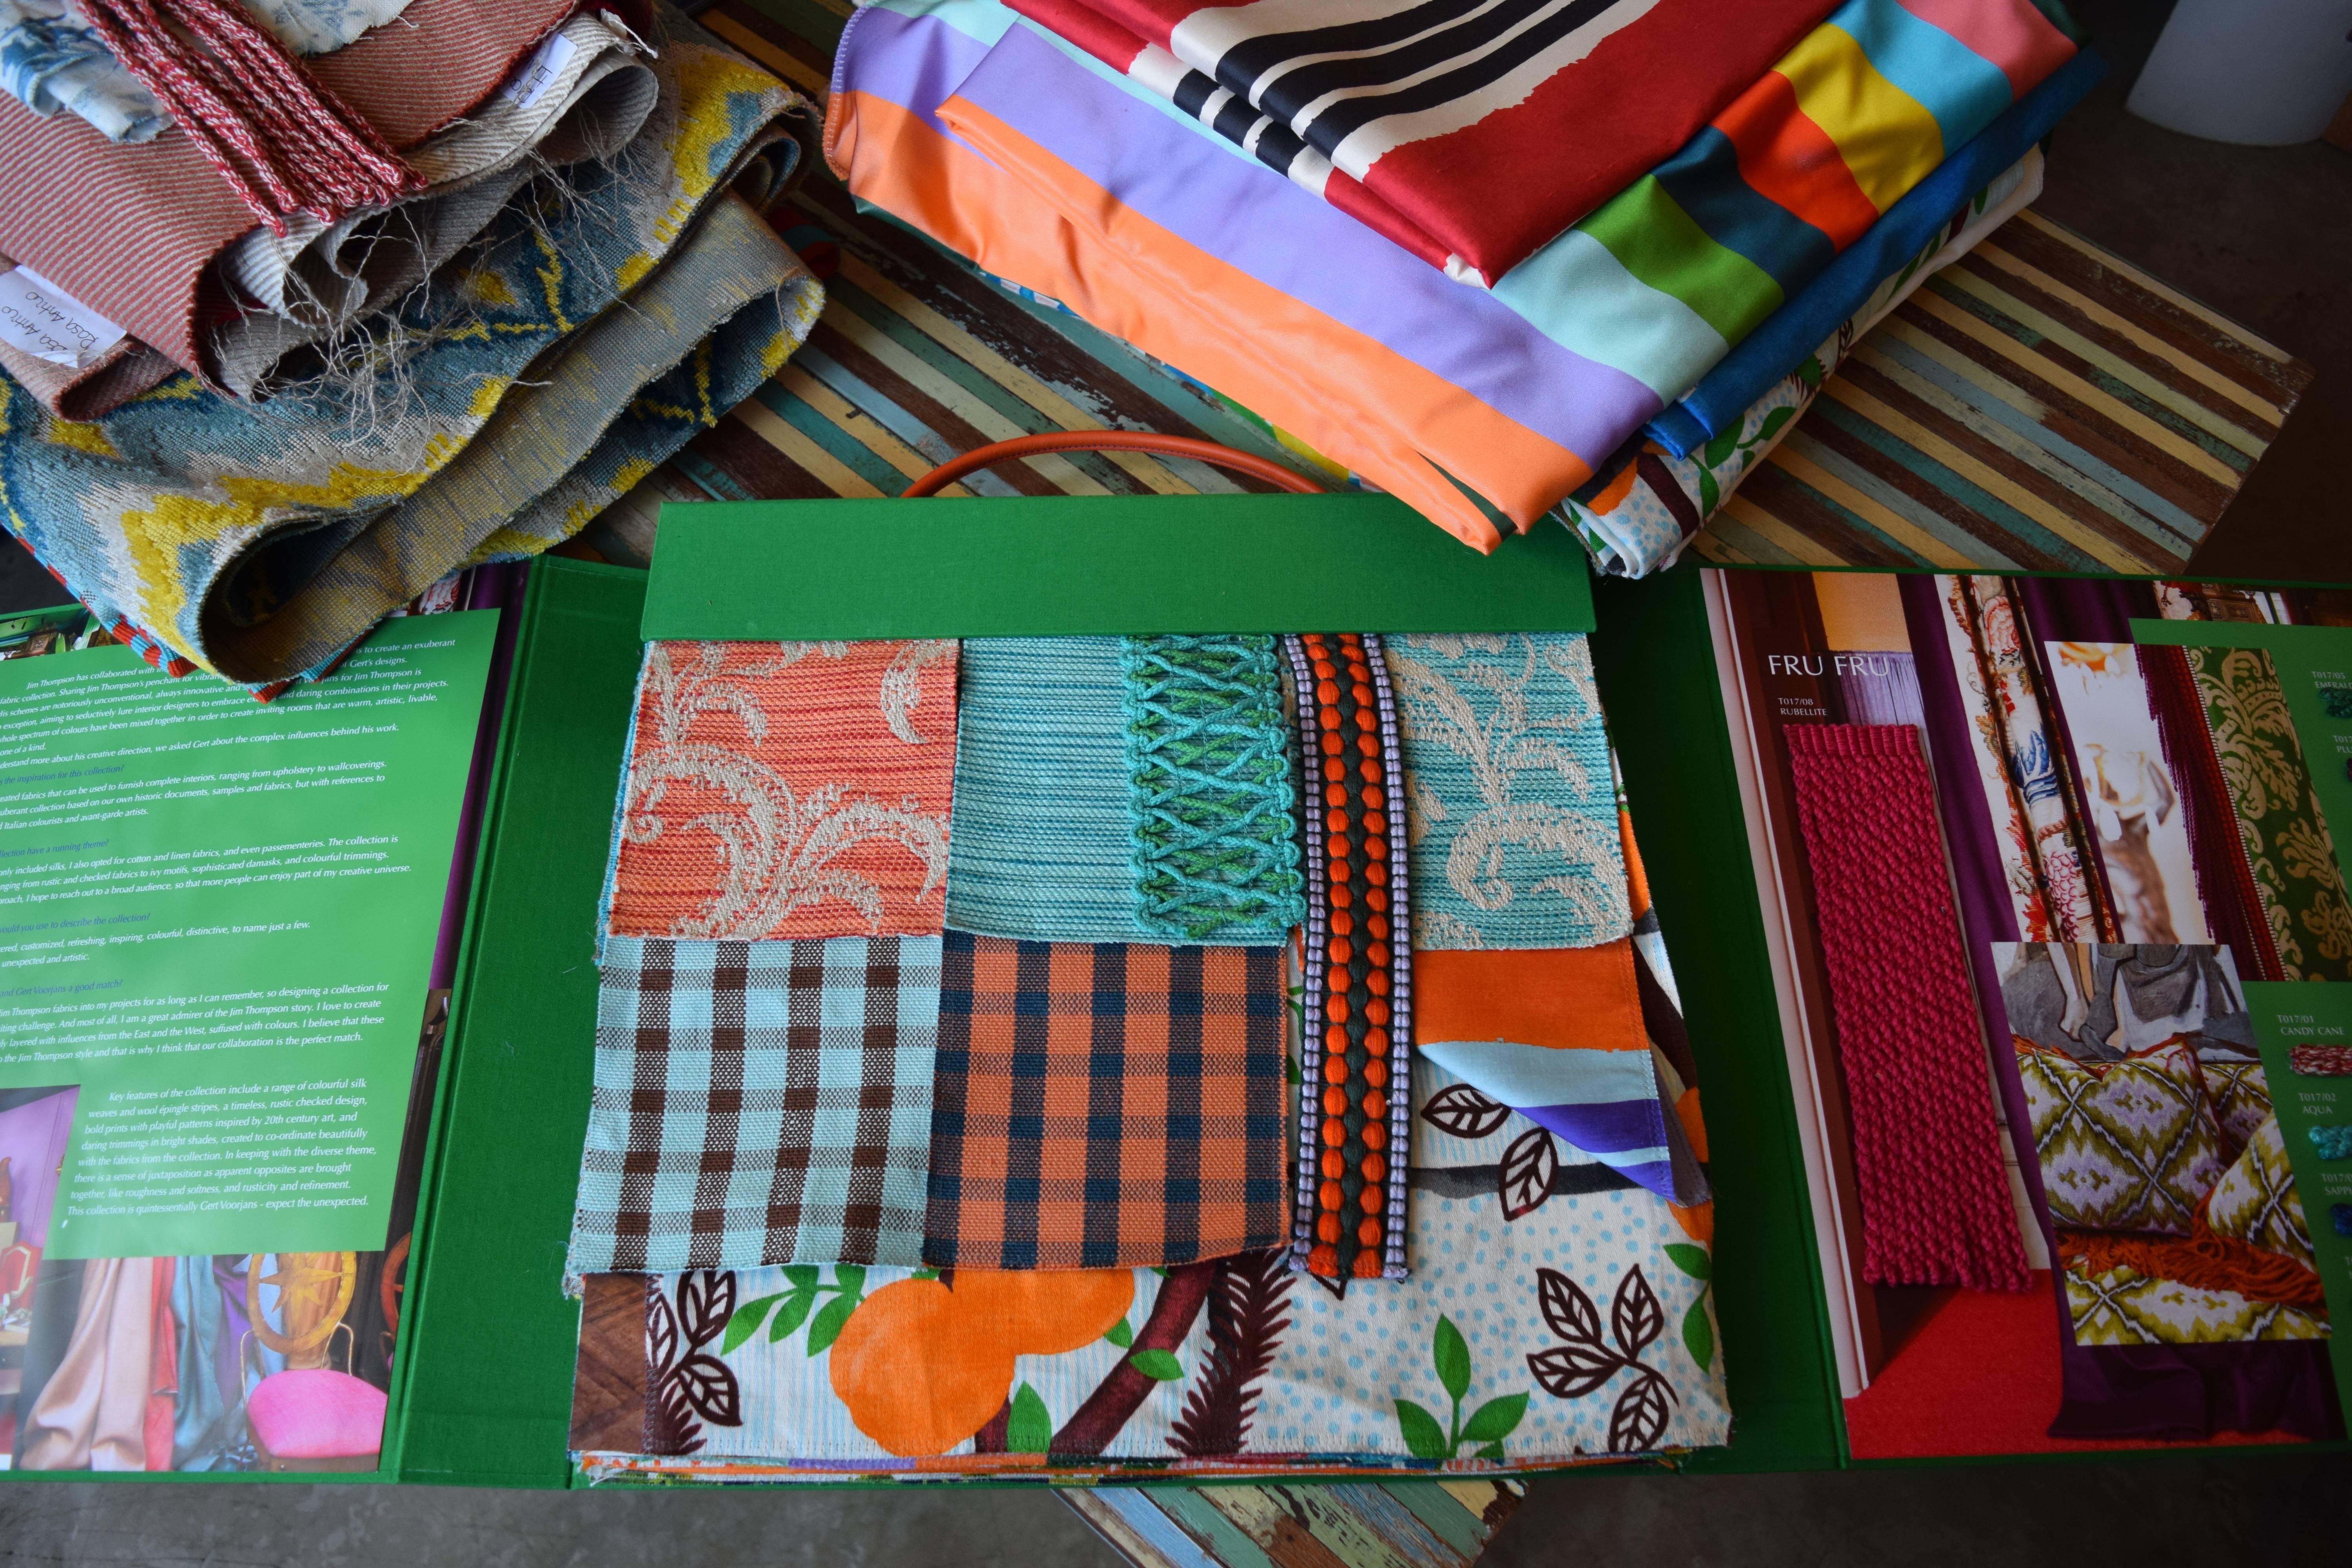 Gert Voorjans for Jim Thompson fabric collection sample book.

Jim Thompson has collaborated with interior architect Gert Voorjans to create an exuberant fabric collection. Sharing Jim Thompson’s penchant for vibrance, colour is a key component of